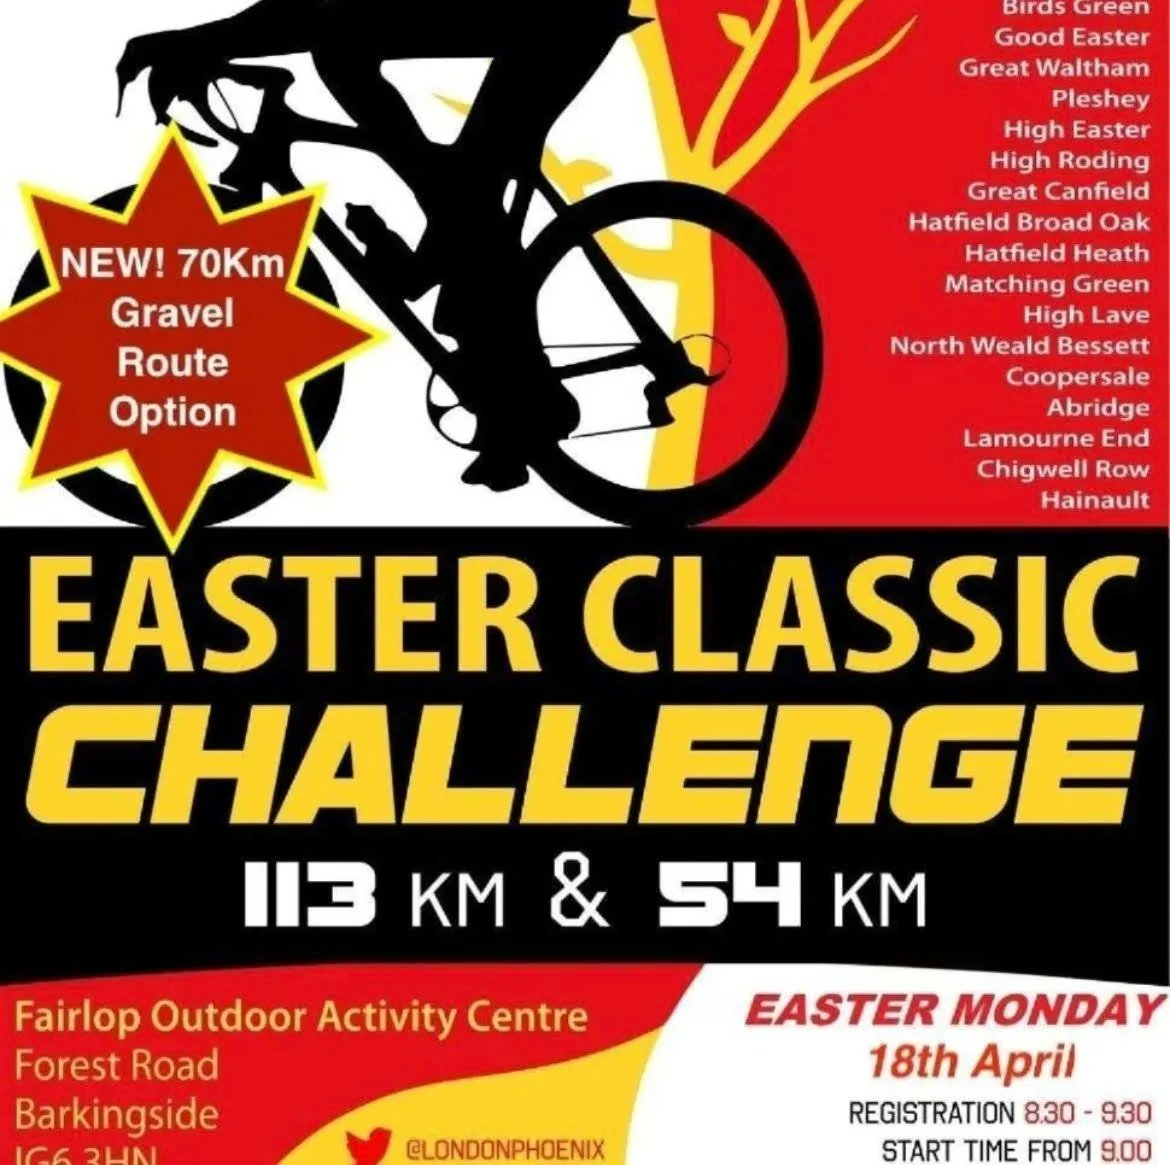 Coming soon, still some places available! Join the London Phoenix 2023 Easter Classic Challenge, 113KM Road, 54Km Road and 70KM Gravel routes available. All welcome - you don't need to be in the club to enter! Sign up online through British Cycling for only £15.00